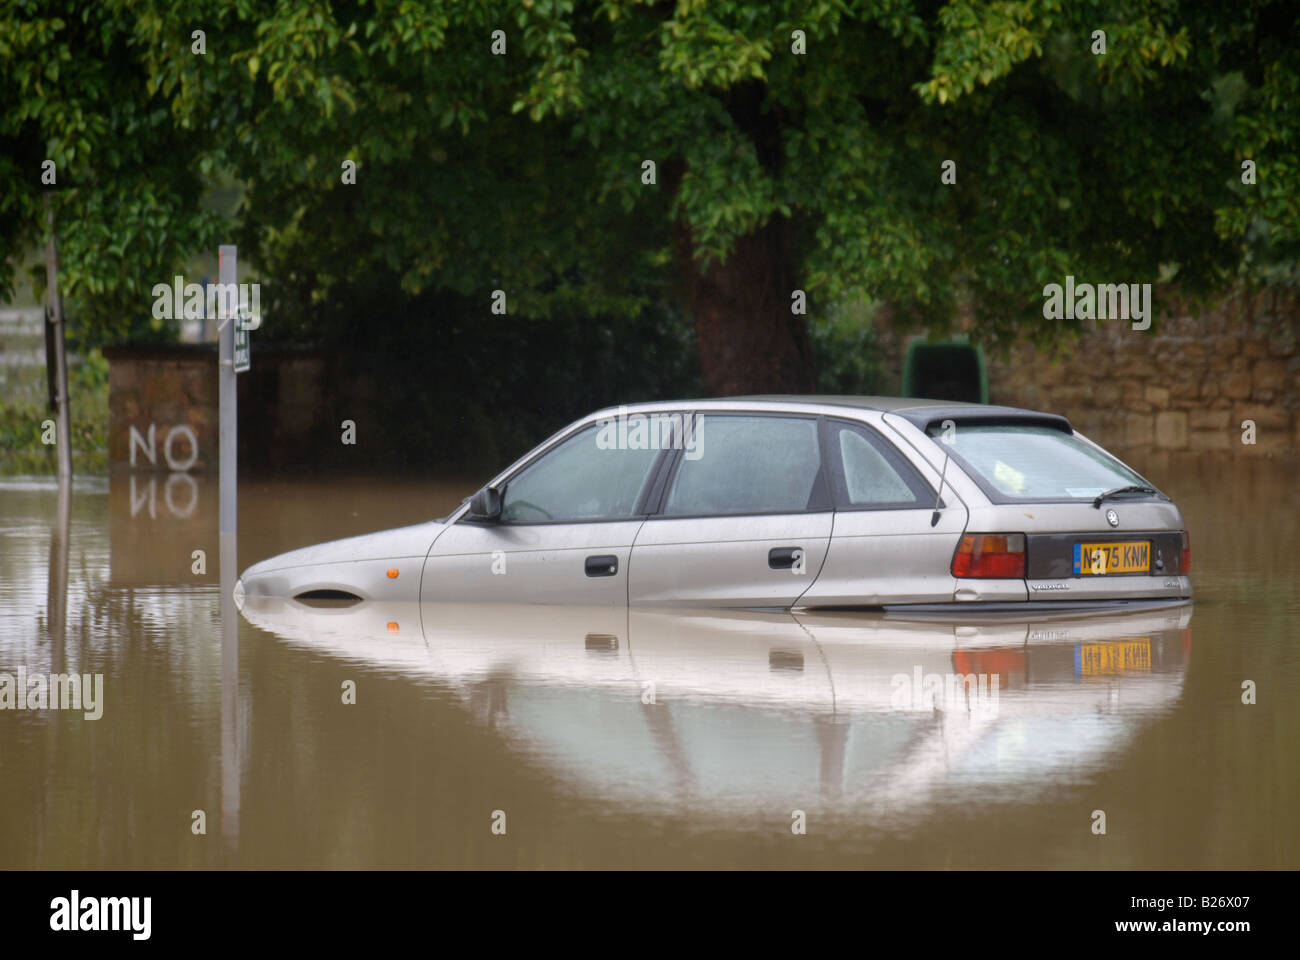 A VEHICLE STUCK IN FLOODWATER IN A TEWKESBURY CAR PARK DURING THE FLOODS IN GLOUCESTERSHIRE JULY 2007 UK Stock Photo